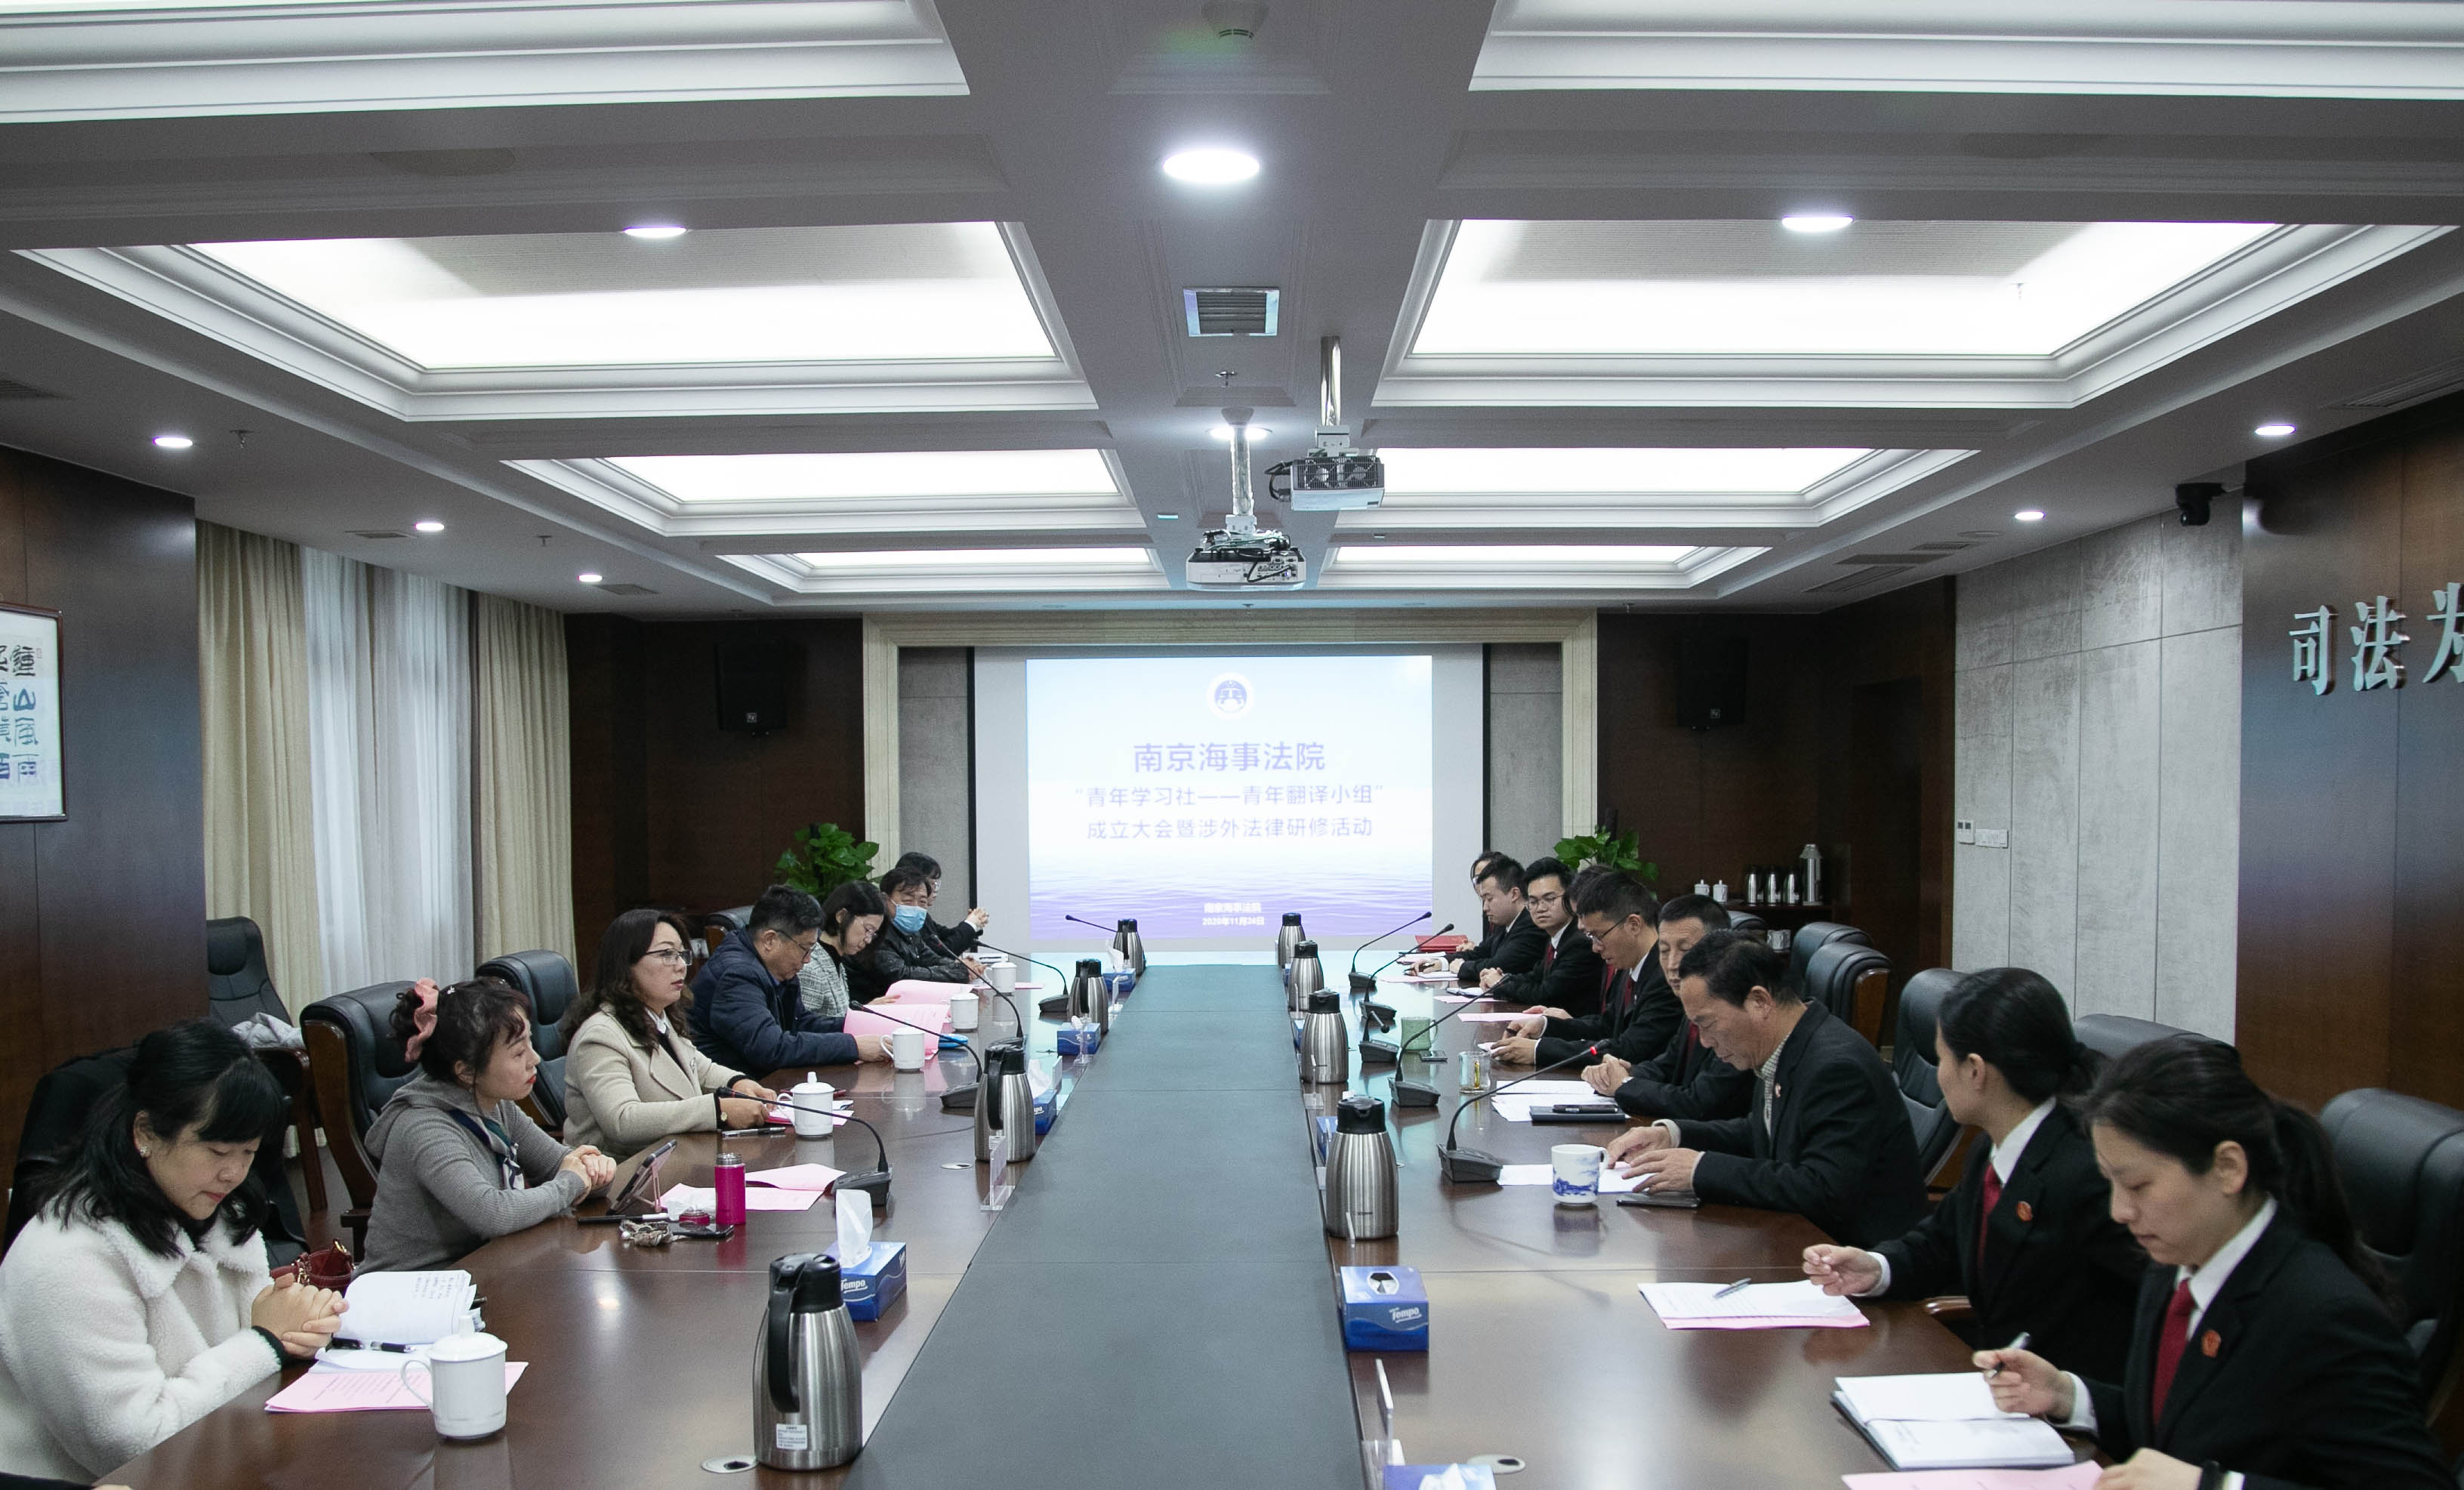 Nanjing Maritime Court held the Inaugurating Meeting of “Youth Translation Team” and the Seminar of Foreign Maritime Law